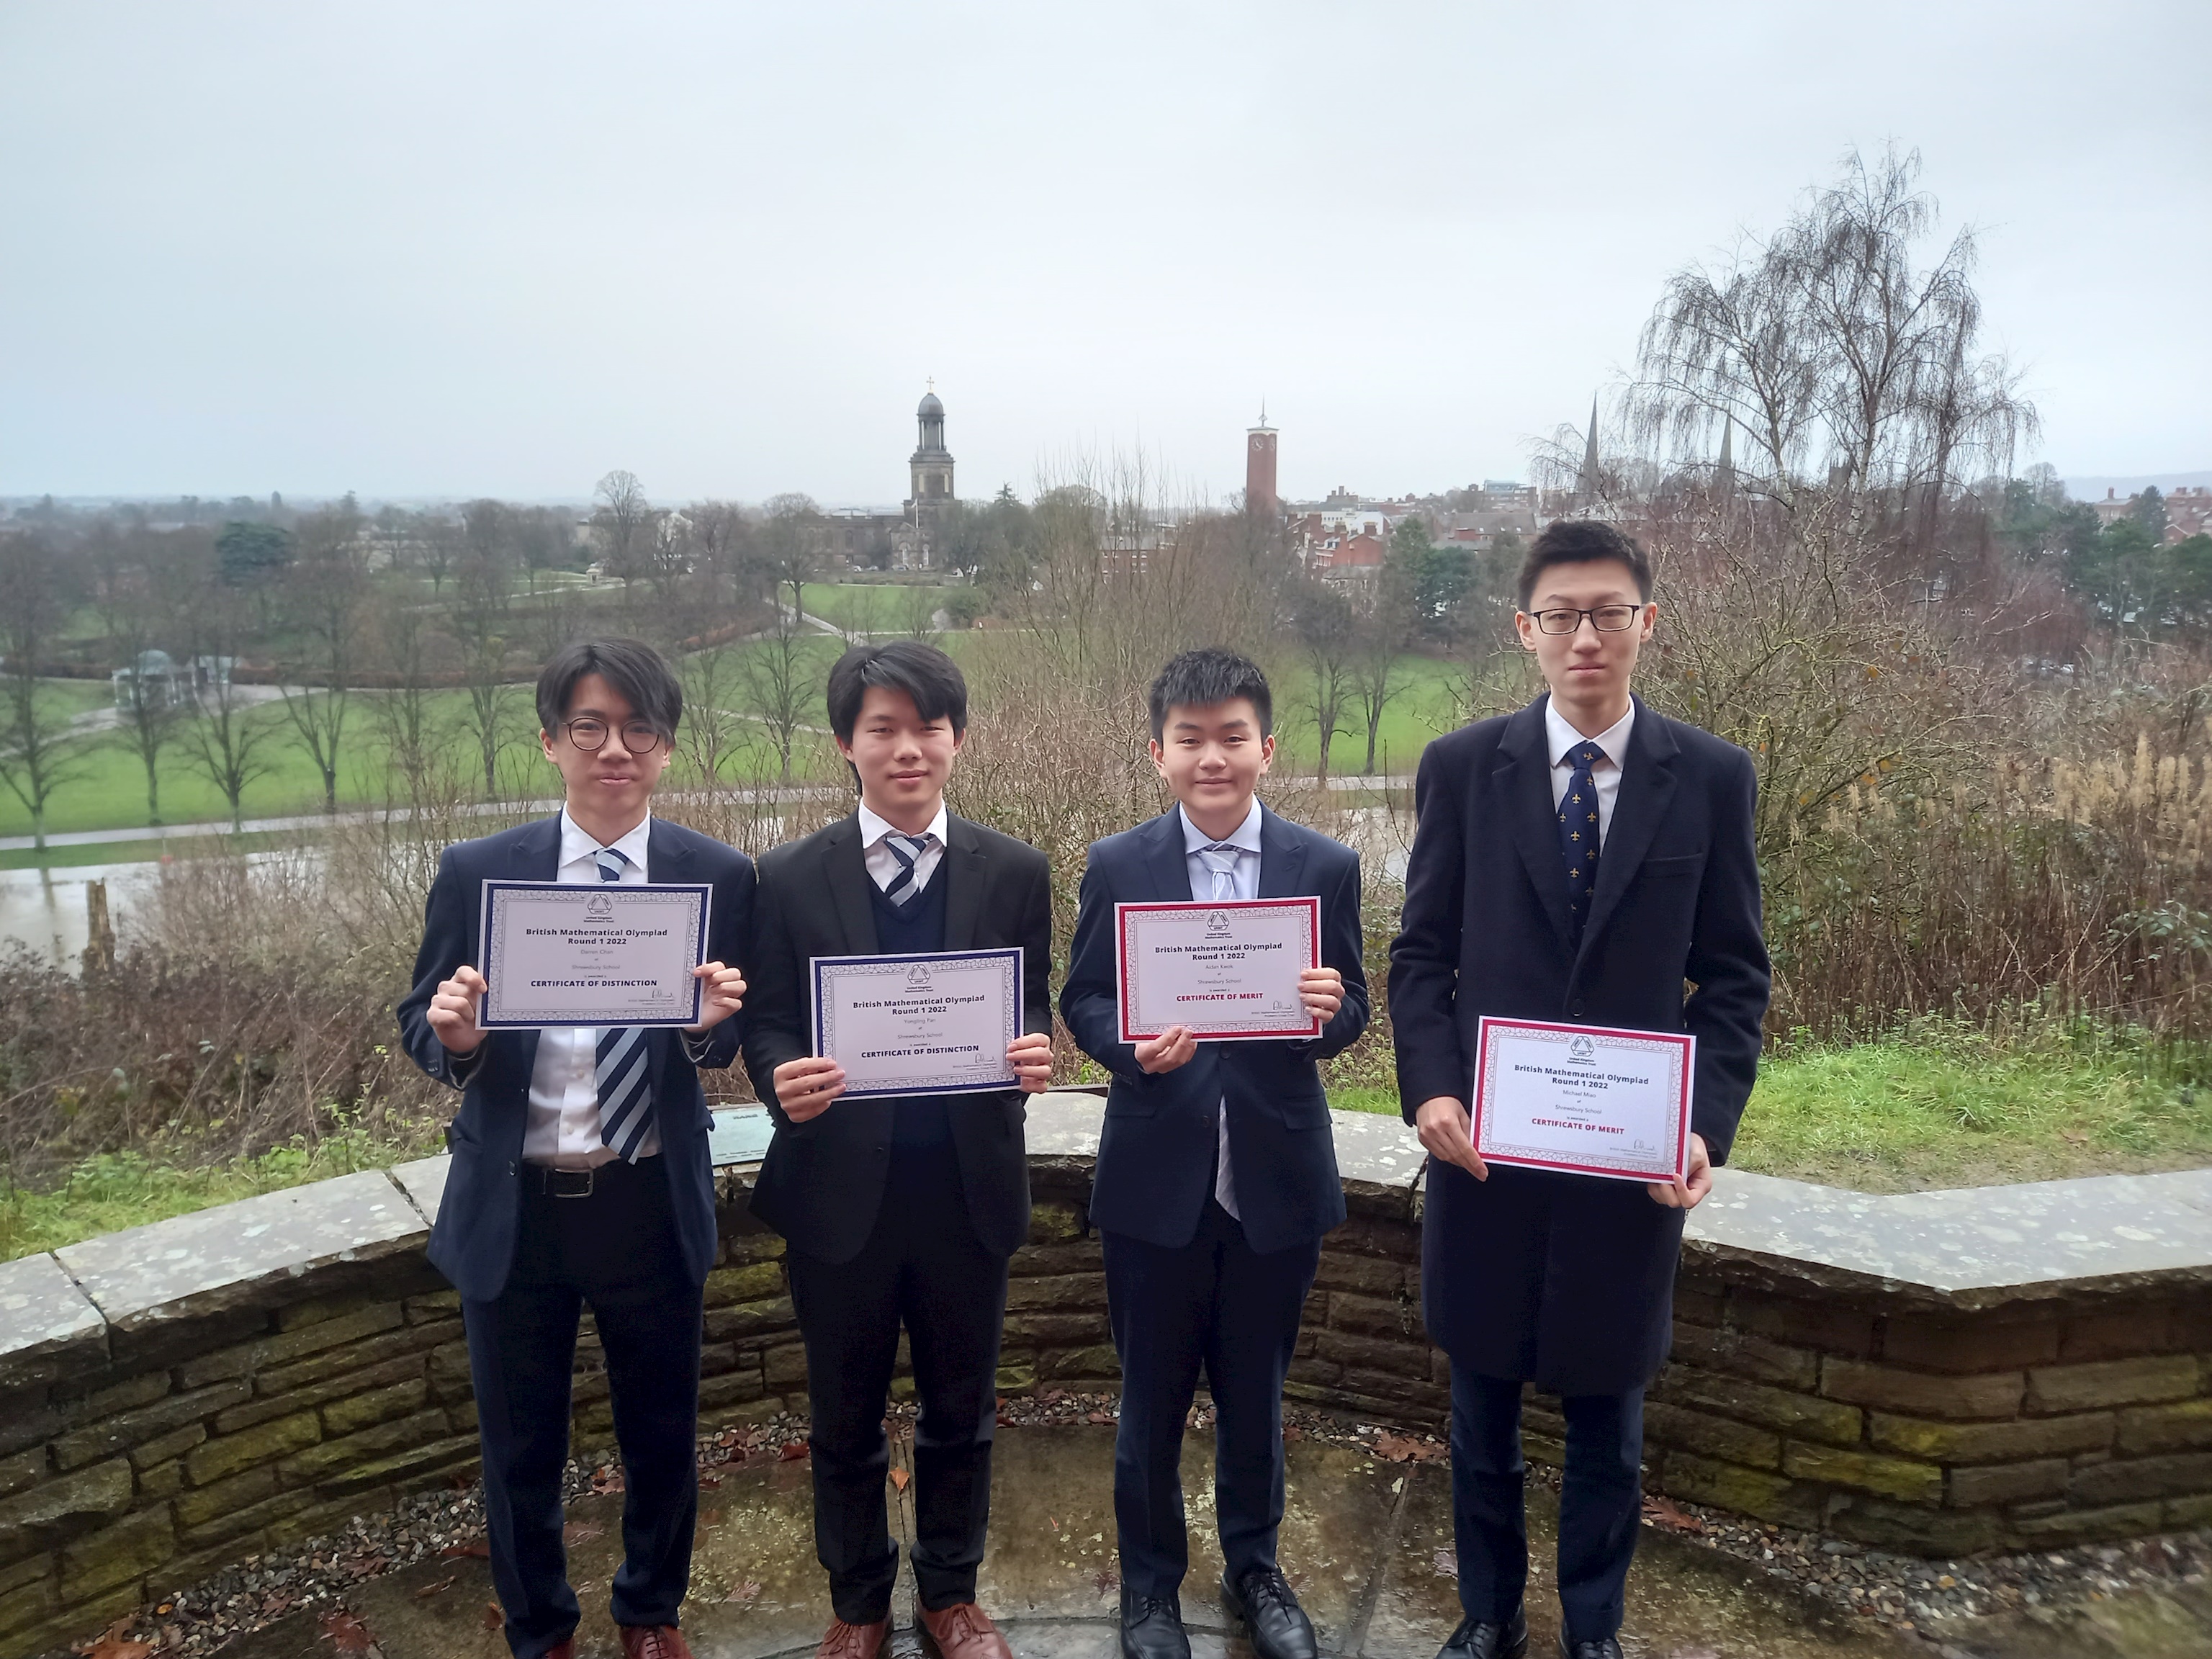 Impressive results for Salopians in British Maths Olympiad